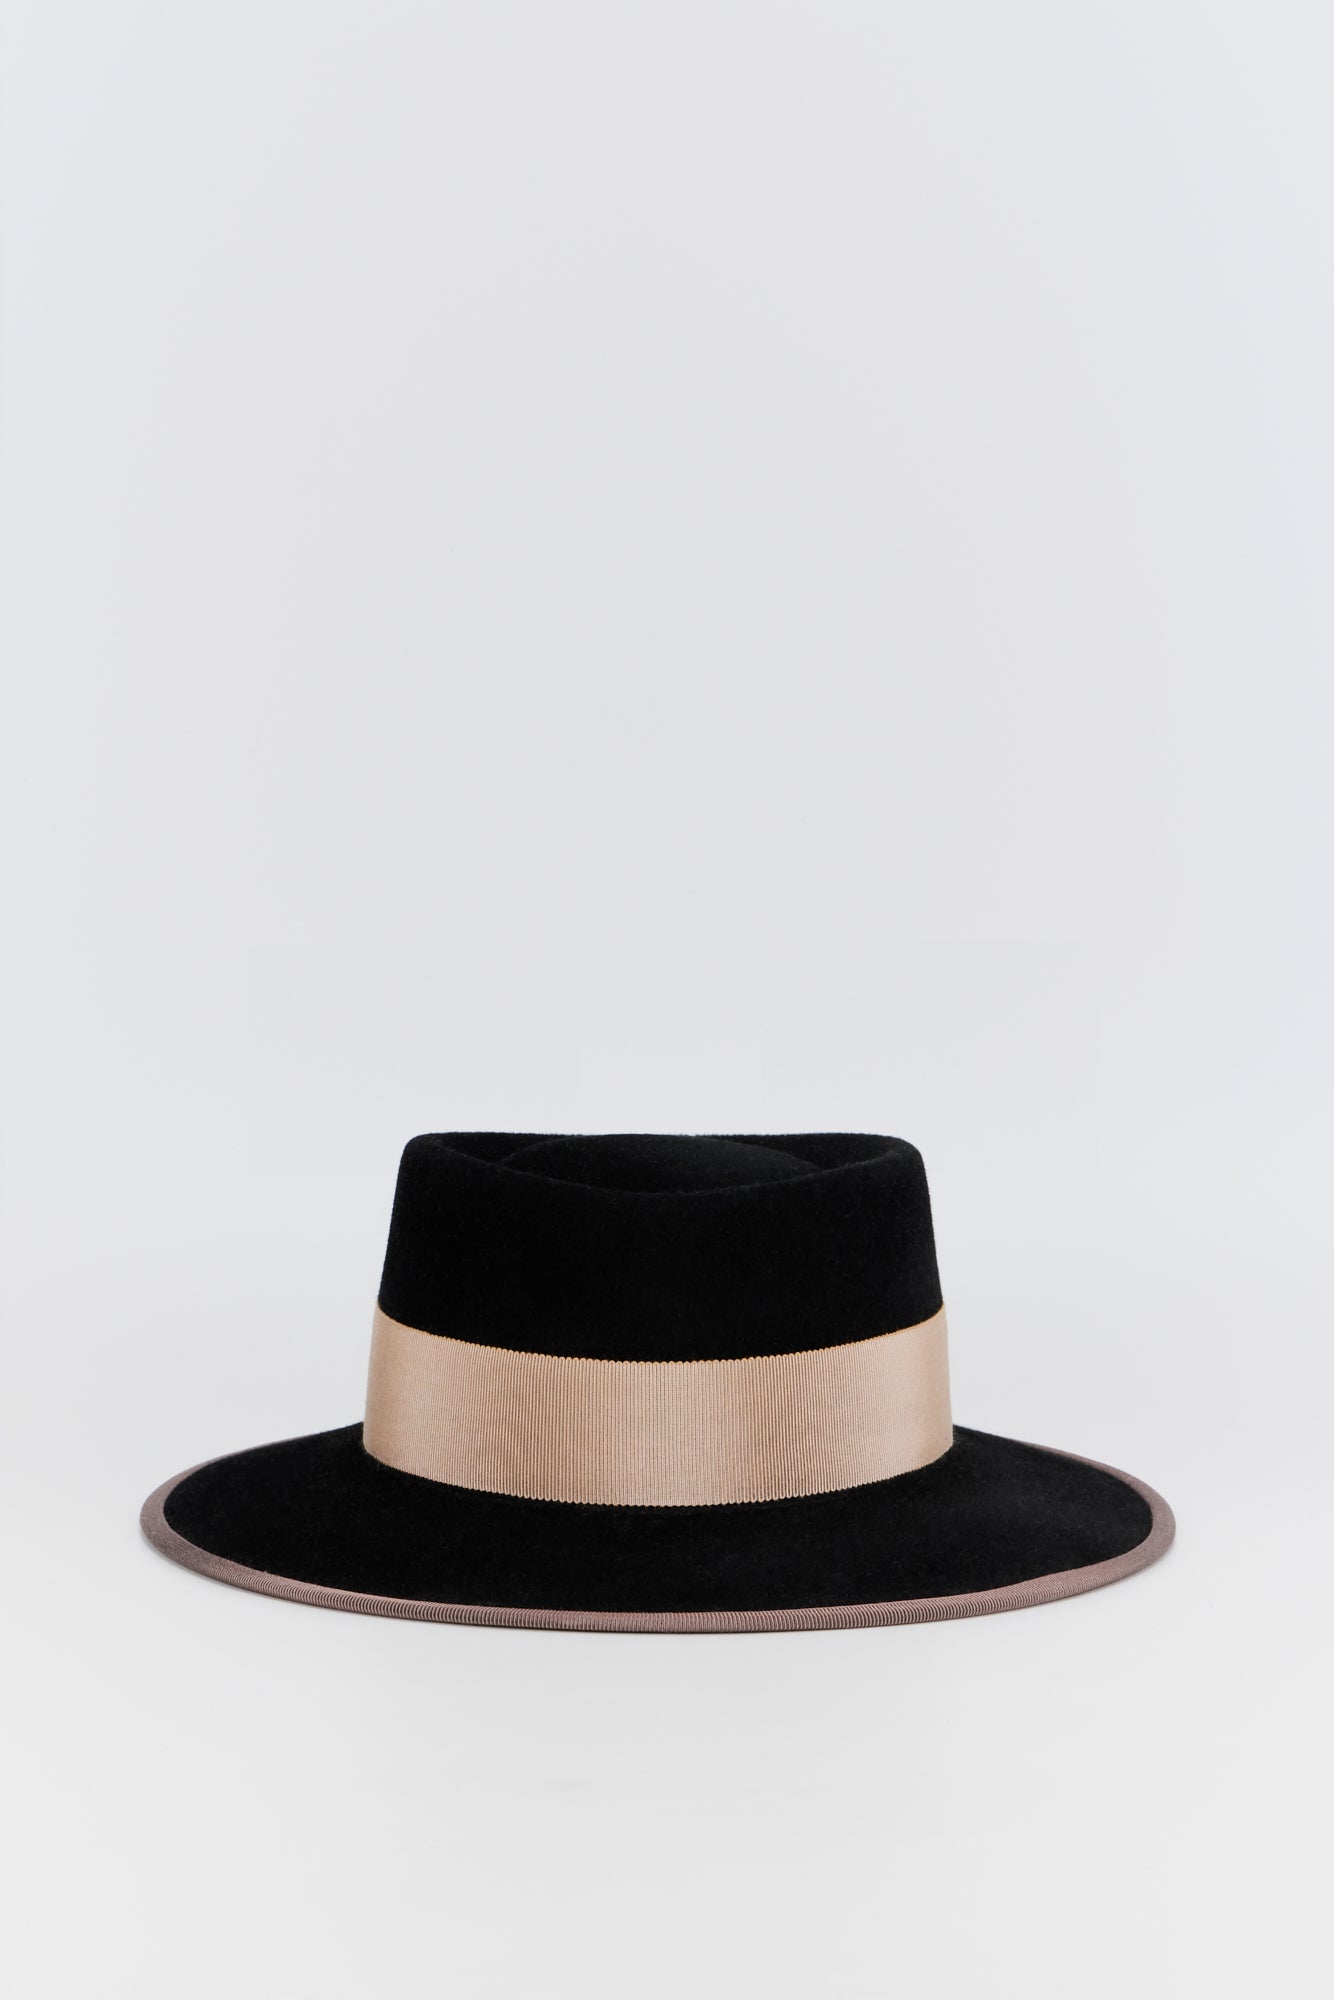 Black Felt Wide-Brim Hat with Woven Band